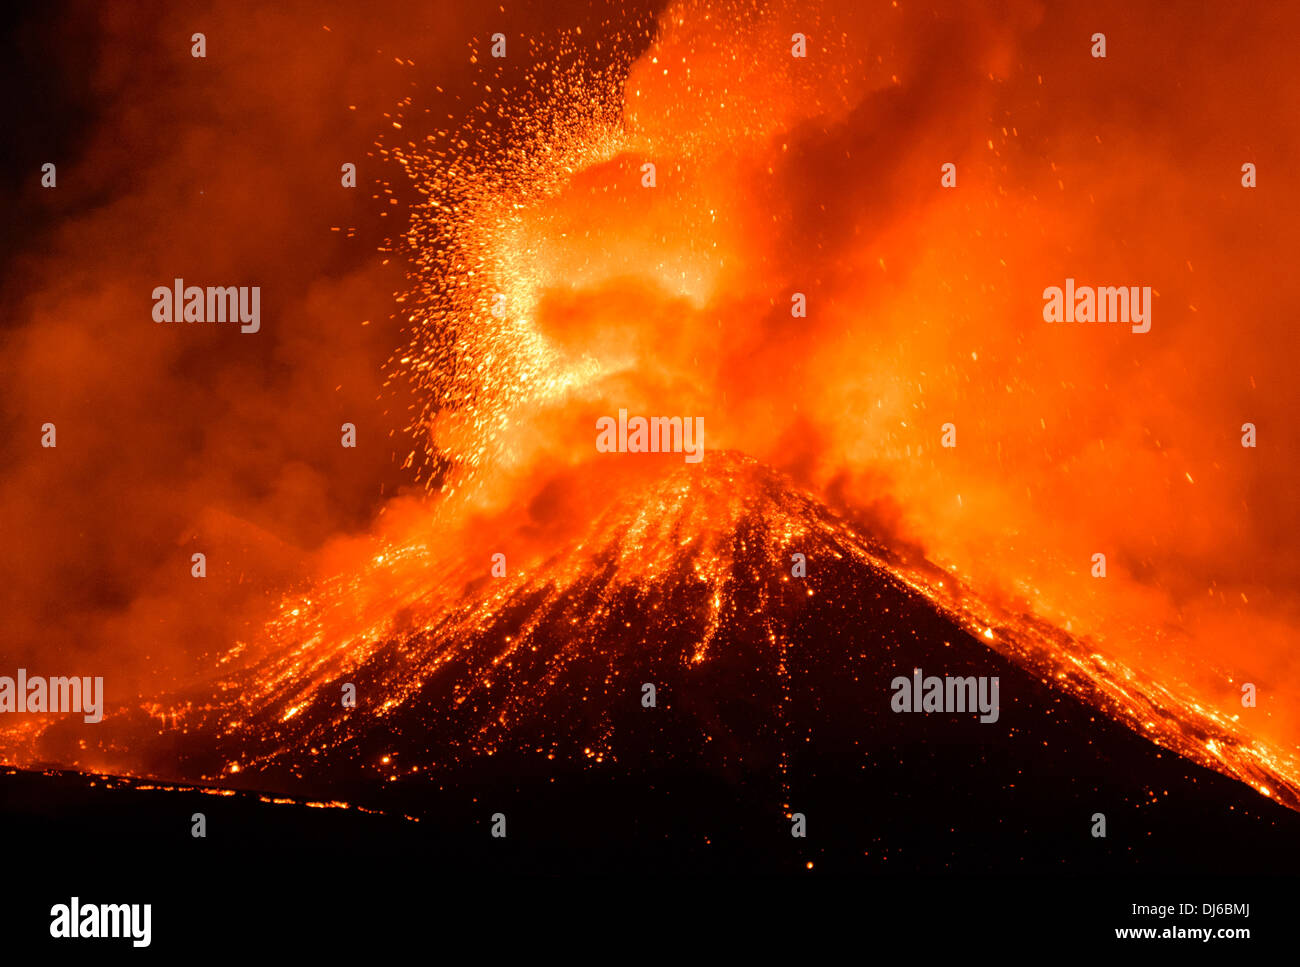 Eruption of Mt Etna volcano in November 2013, night-time violent paroxysm of New SE crater with lava fountains and lava flows. Stock Photo